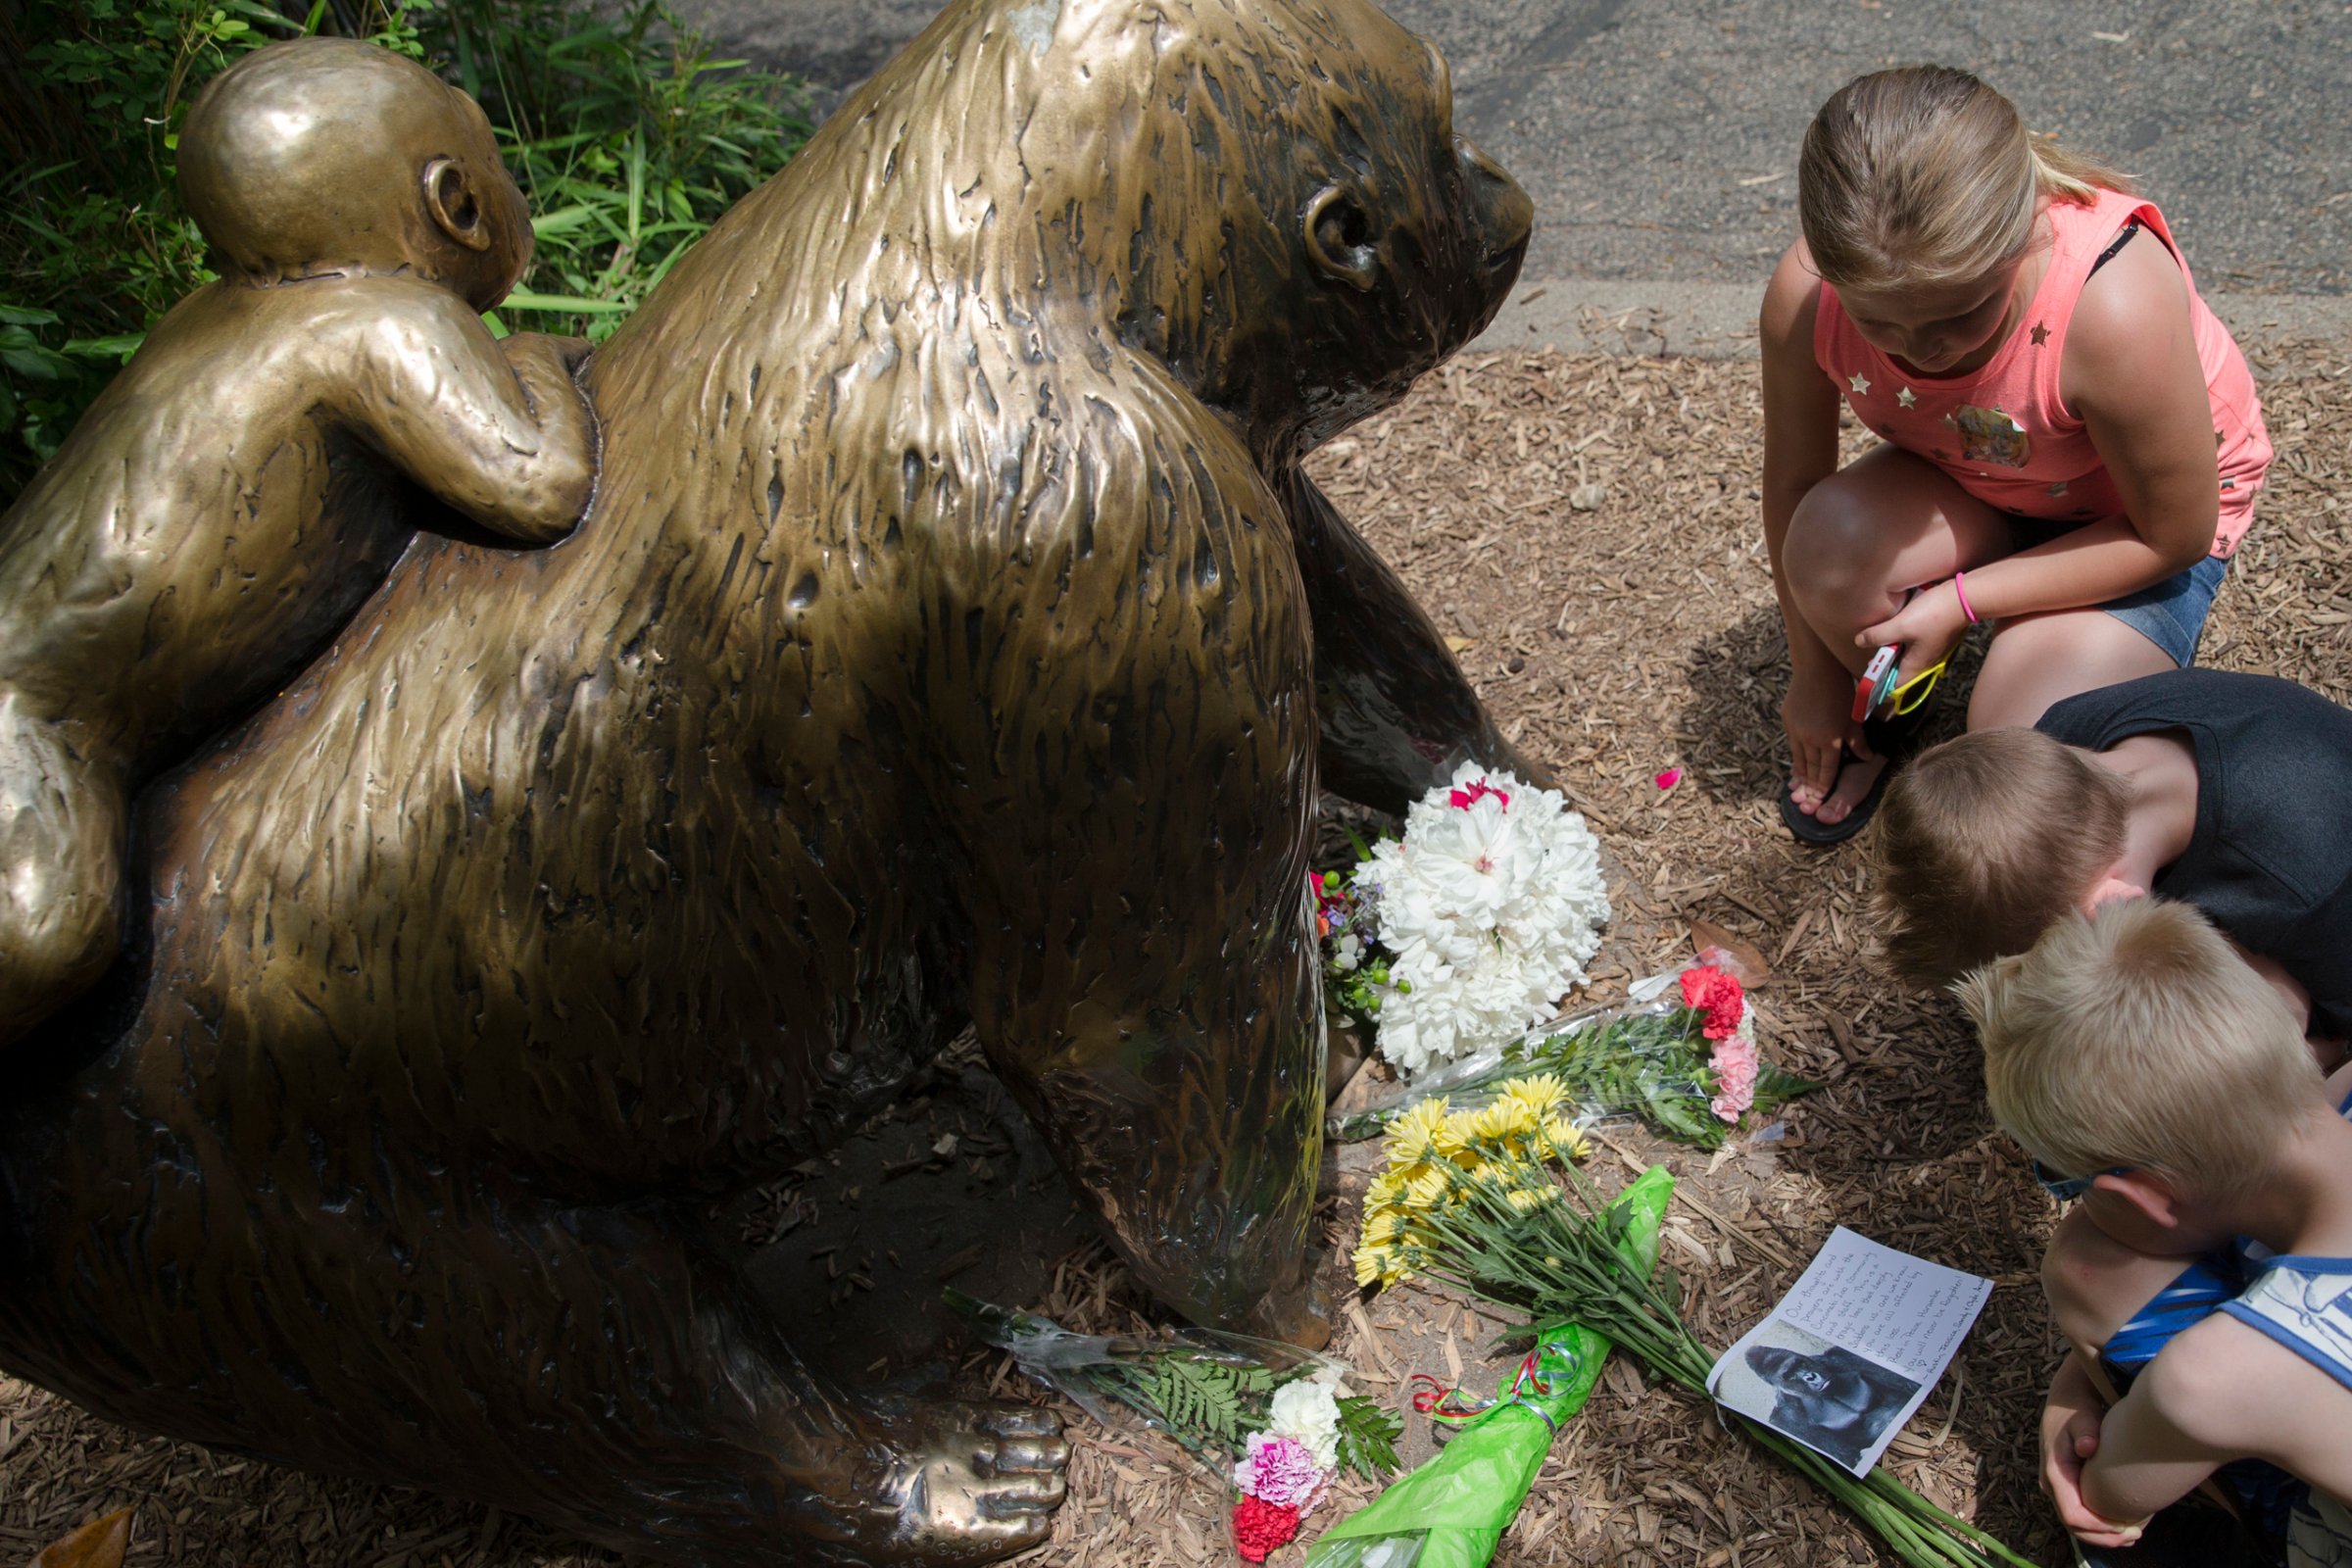 Children pause at the feet of a gorilla statue where flowers and a sympathy card have been placed, outside the Gorilla World exhibit at the Cincinnati Zoo & Botanical Garden, Sunday, May 29, 2016, in Cincinnati. On Saturday, a special zoo response team shot and killed Harambe, a 17-year-old gorilla, that grabbed and dragged a 4-year-old boy who fell into the gorilla exhibit moat. Authorities said the boy is expected to recover. He was taken to Cincinnati Children's Hospital Medical Center. (AP Photo/John Minchillo)